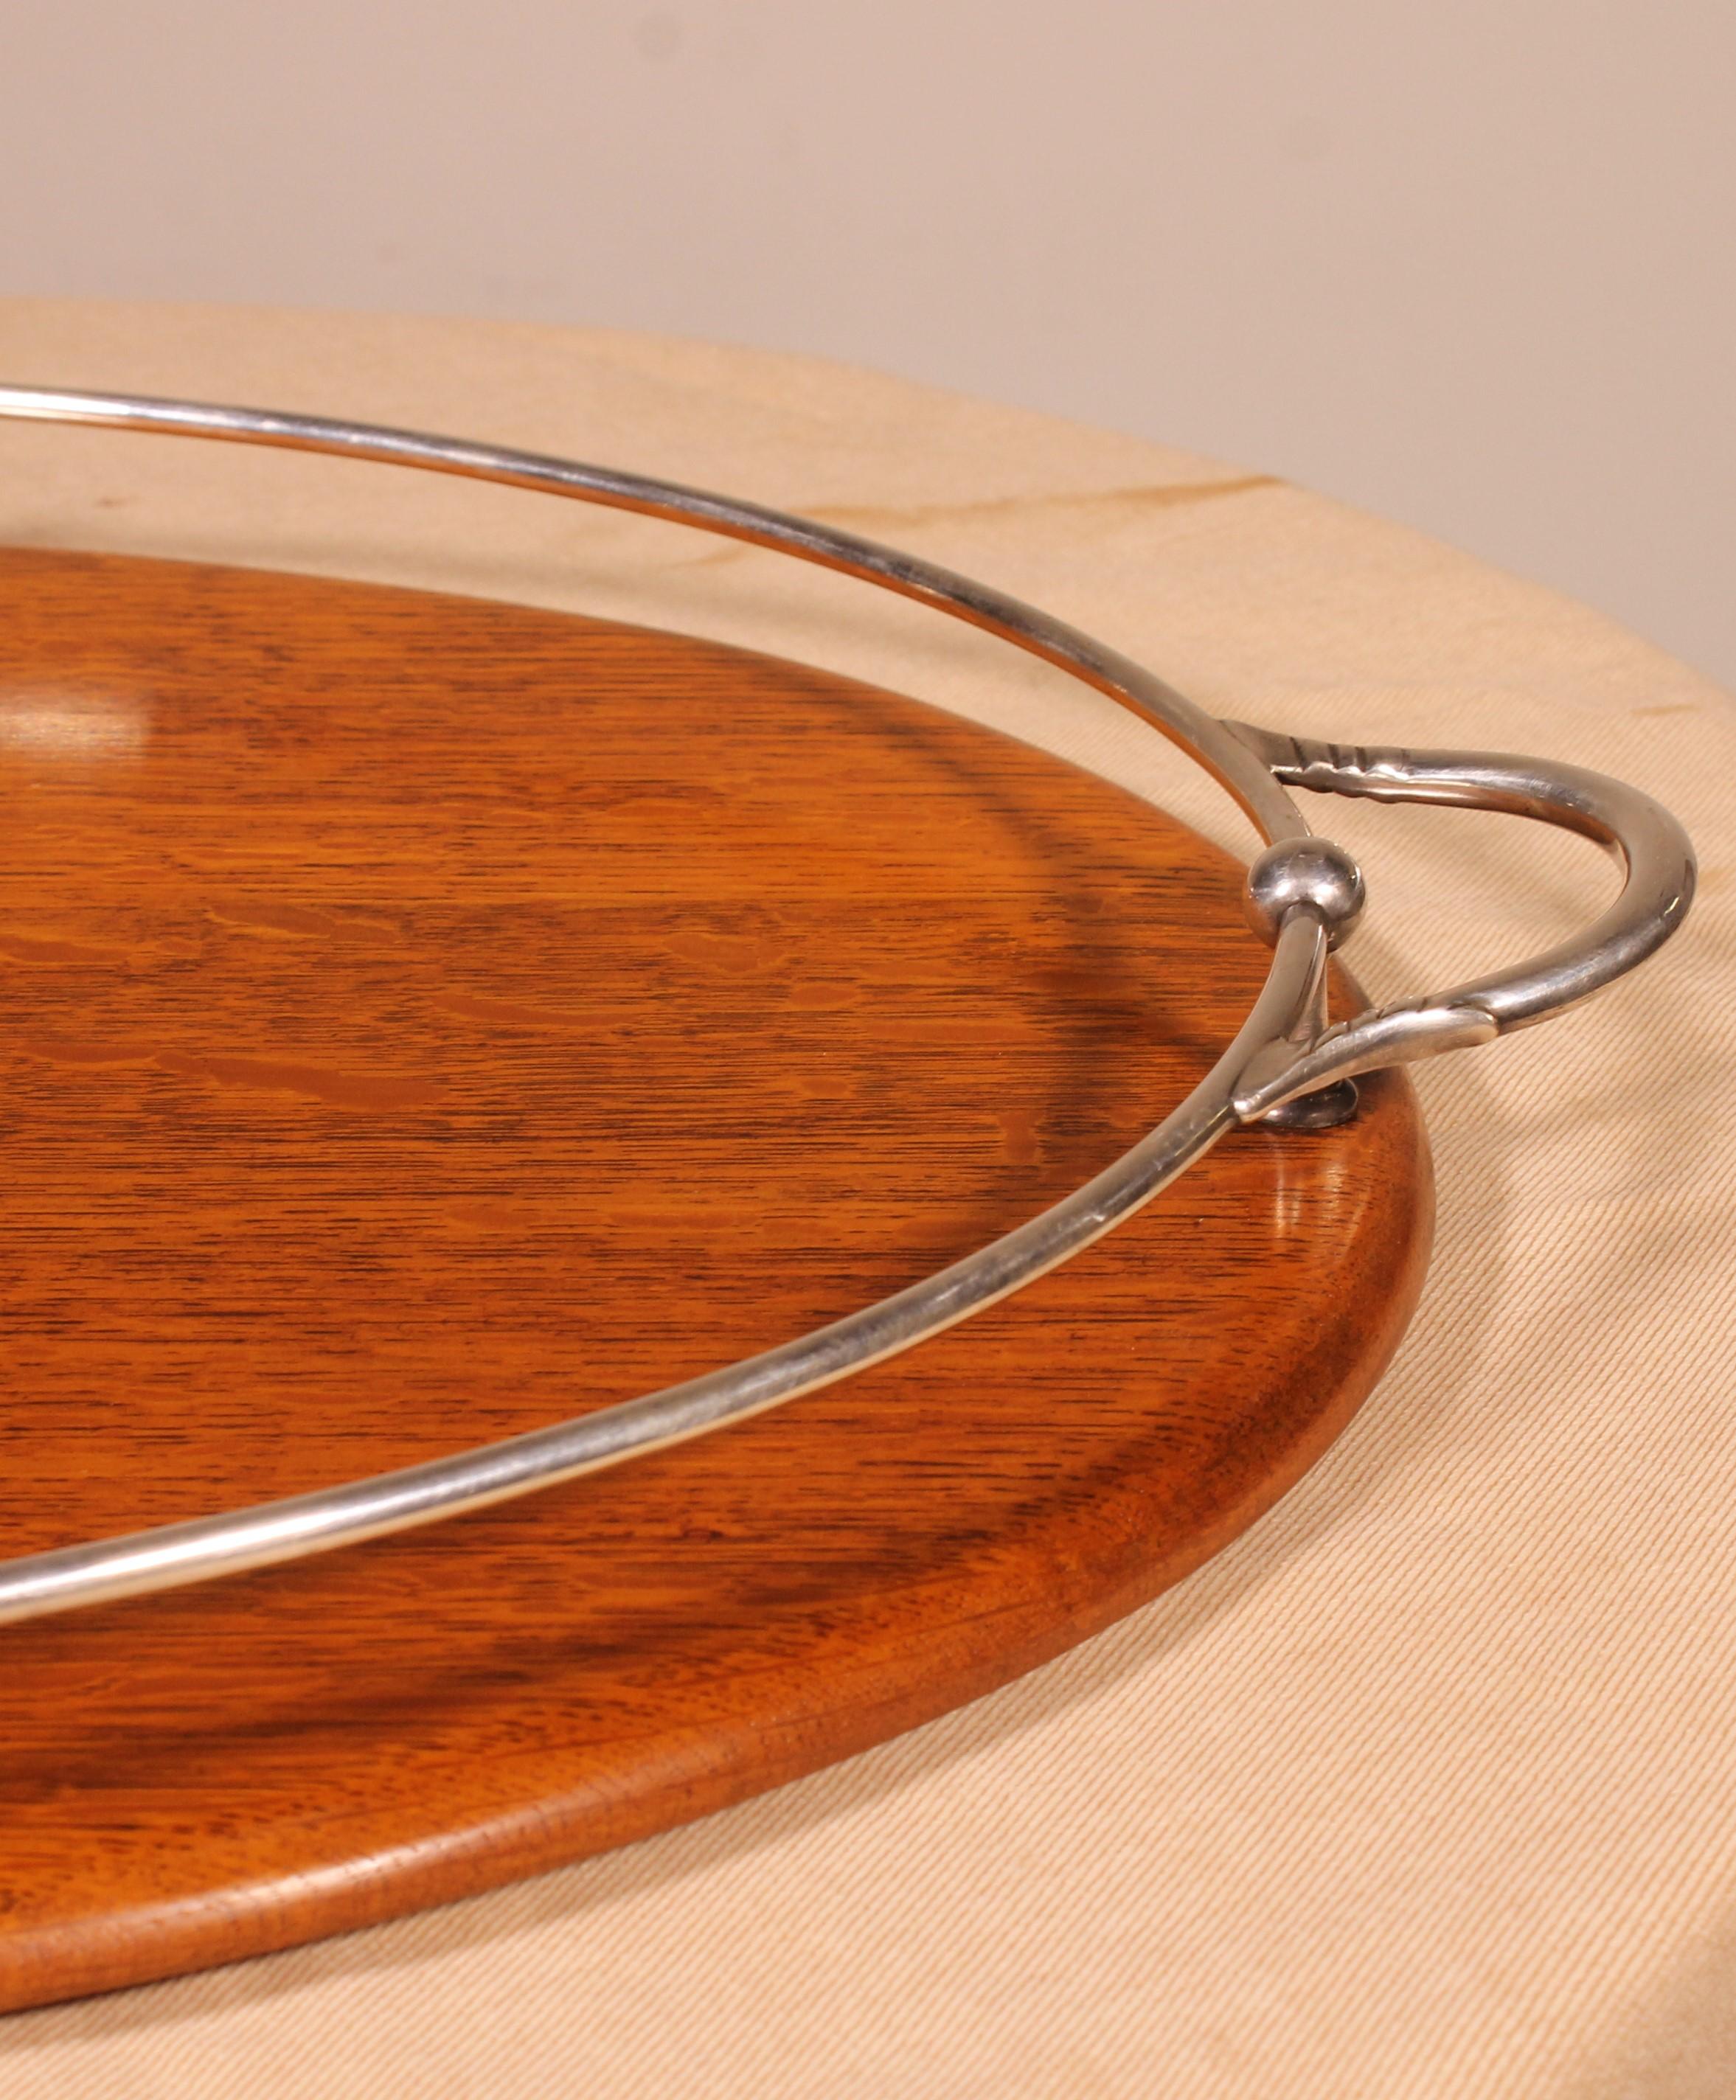 Late Victorian Tray In Silver Plated Metal And Oak From The 19th Century